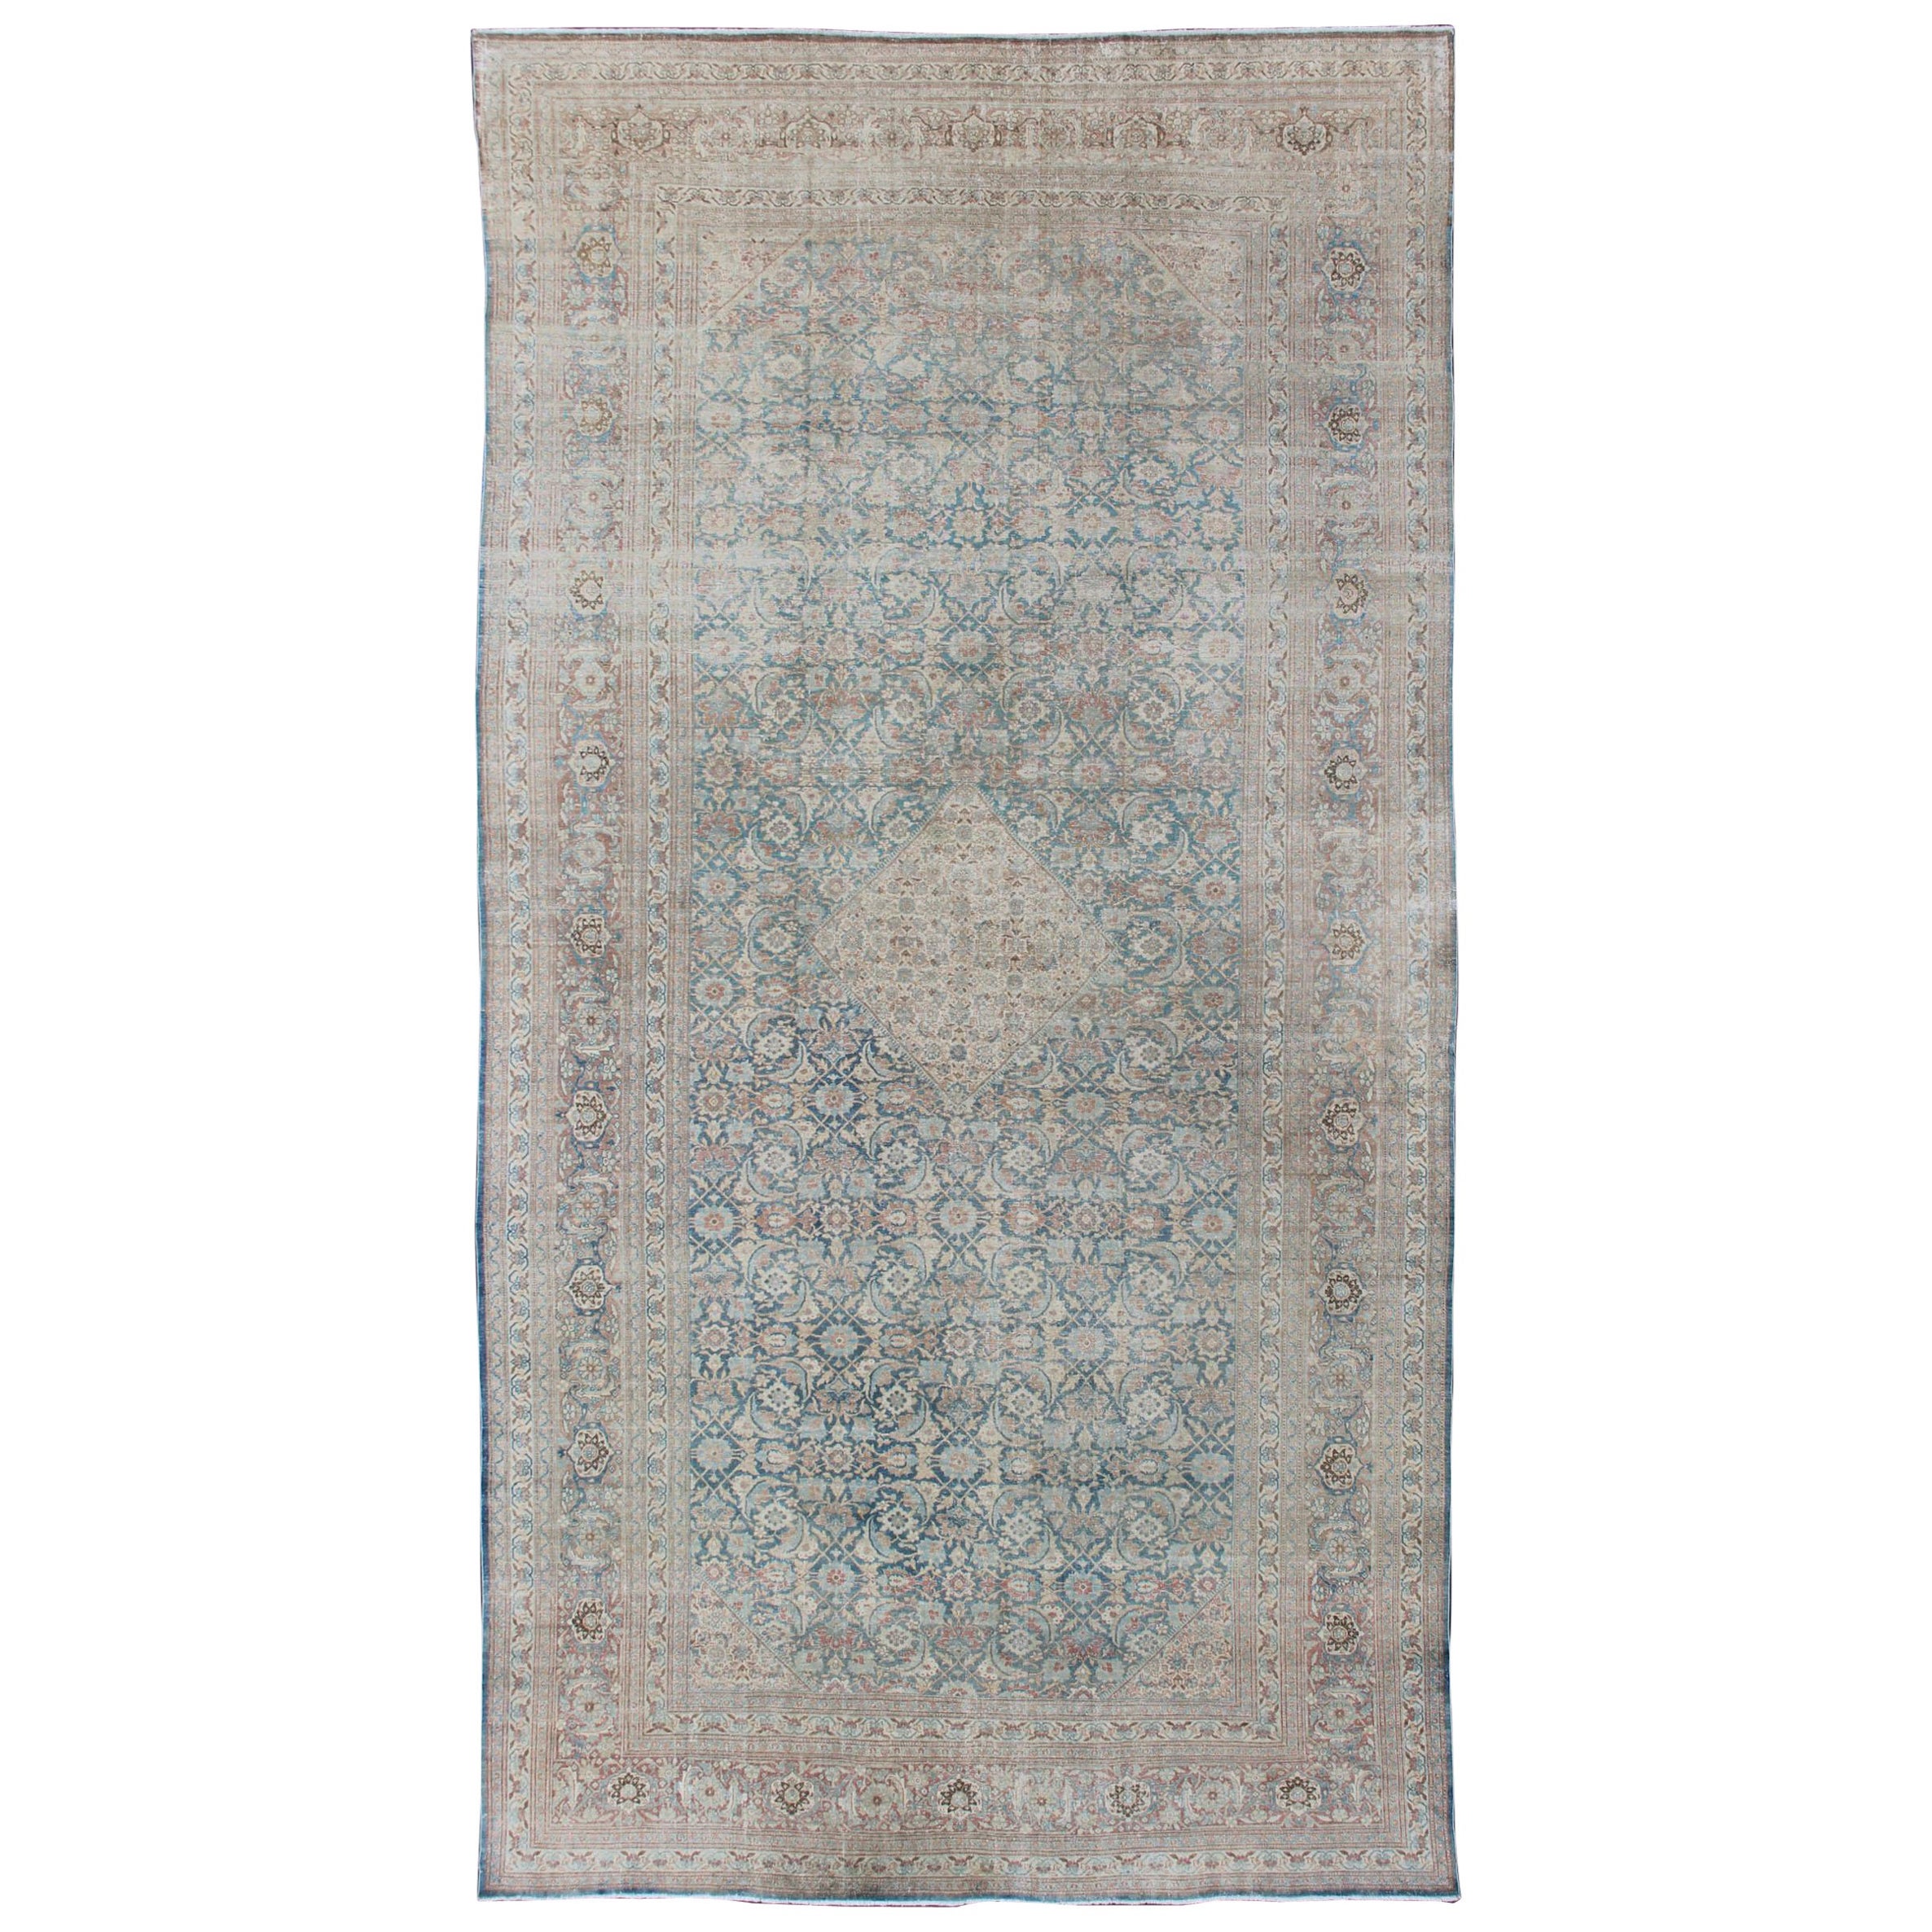 Large Antique Persian Tabriz Rug with Sub Geometric Herati Design in Light Blue For Sale